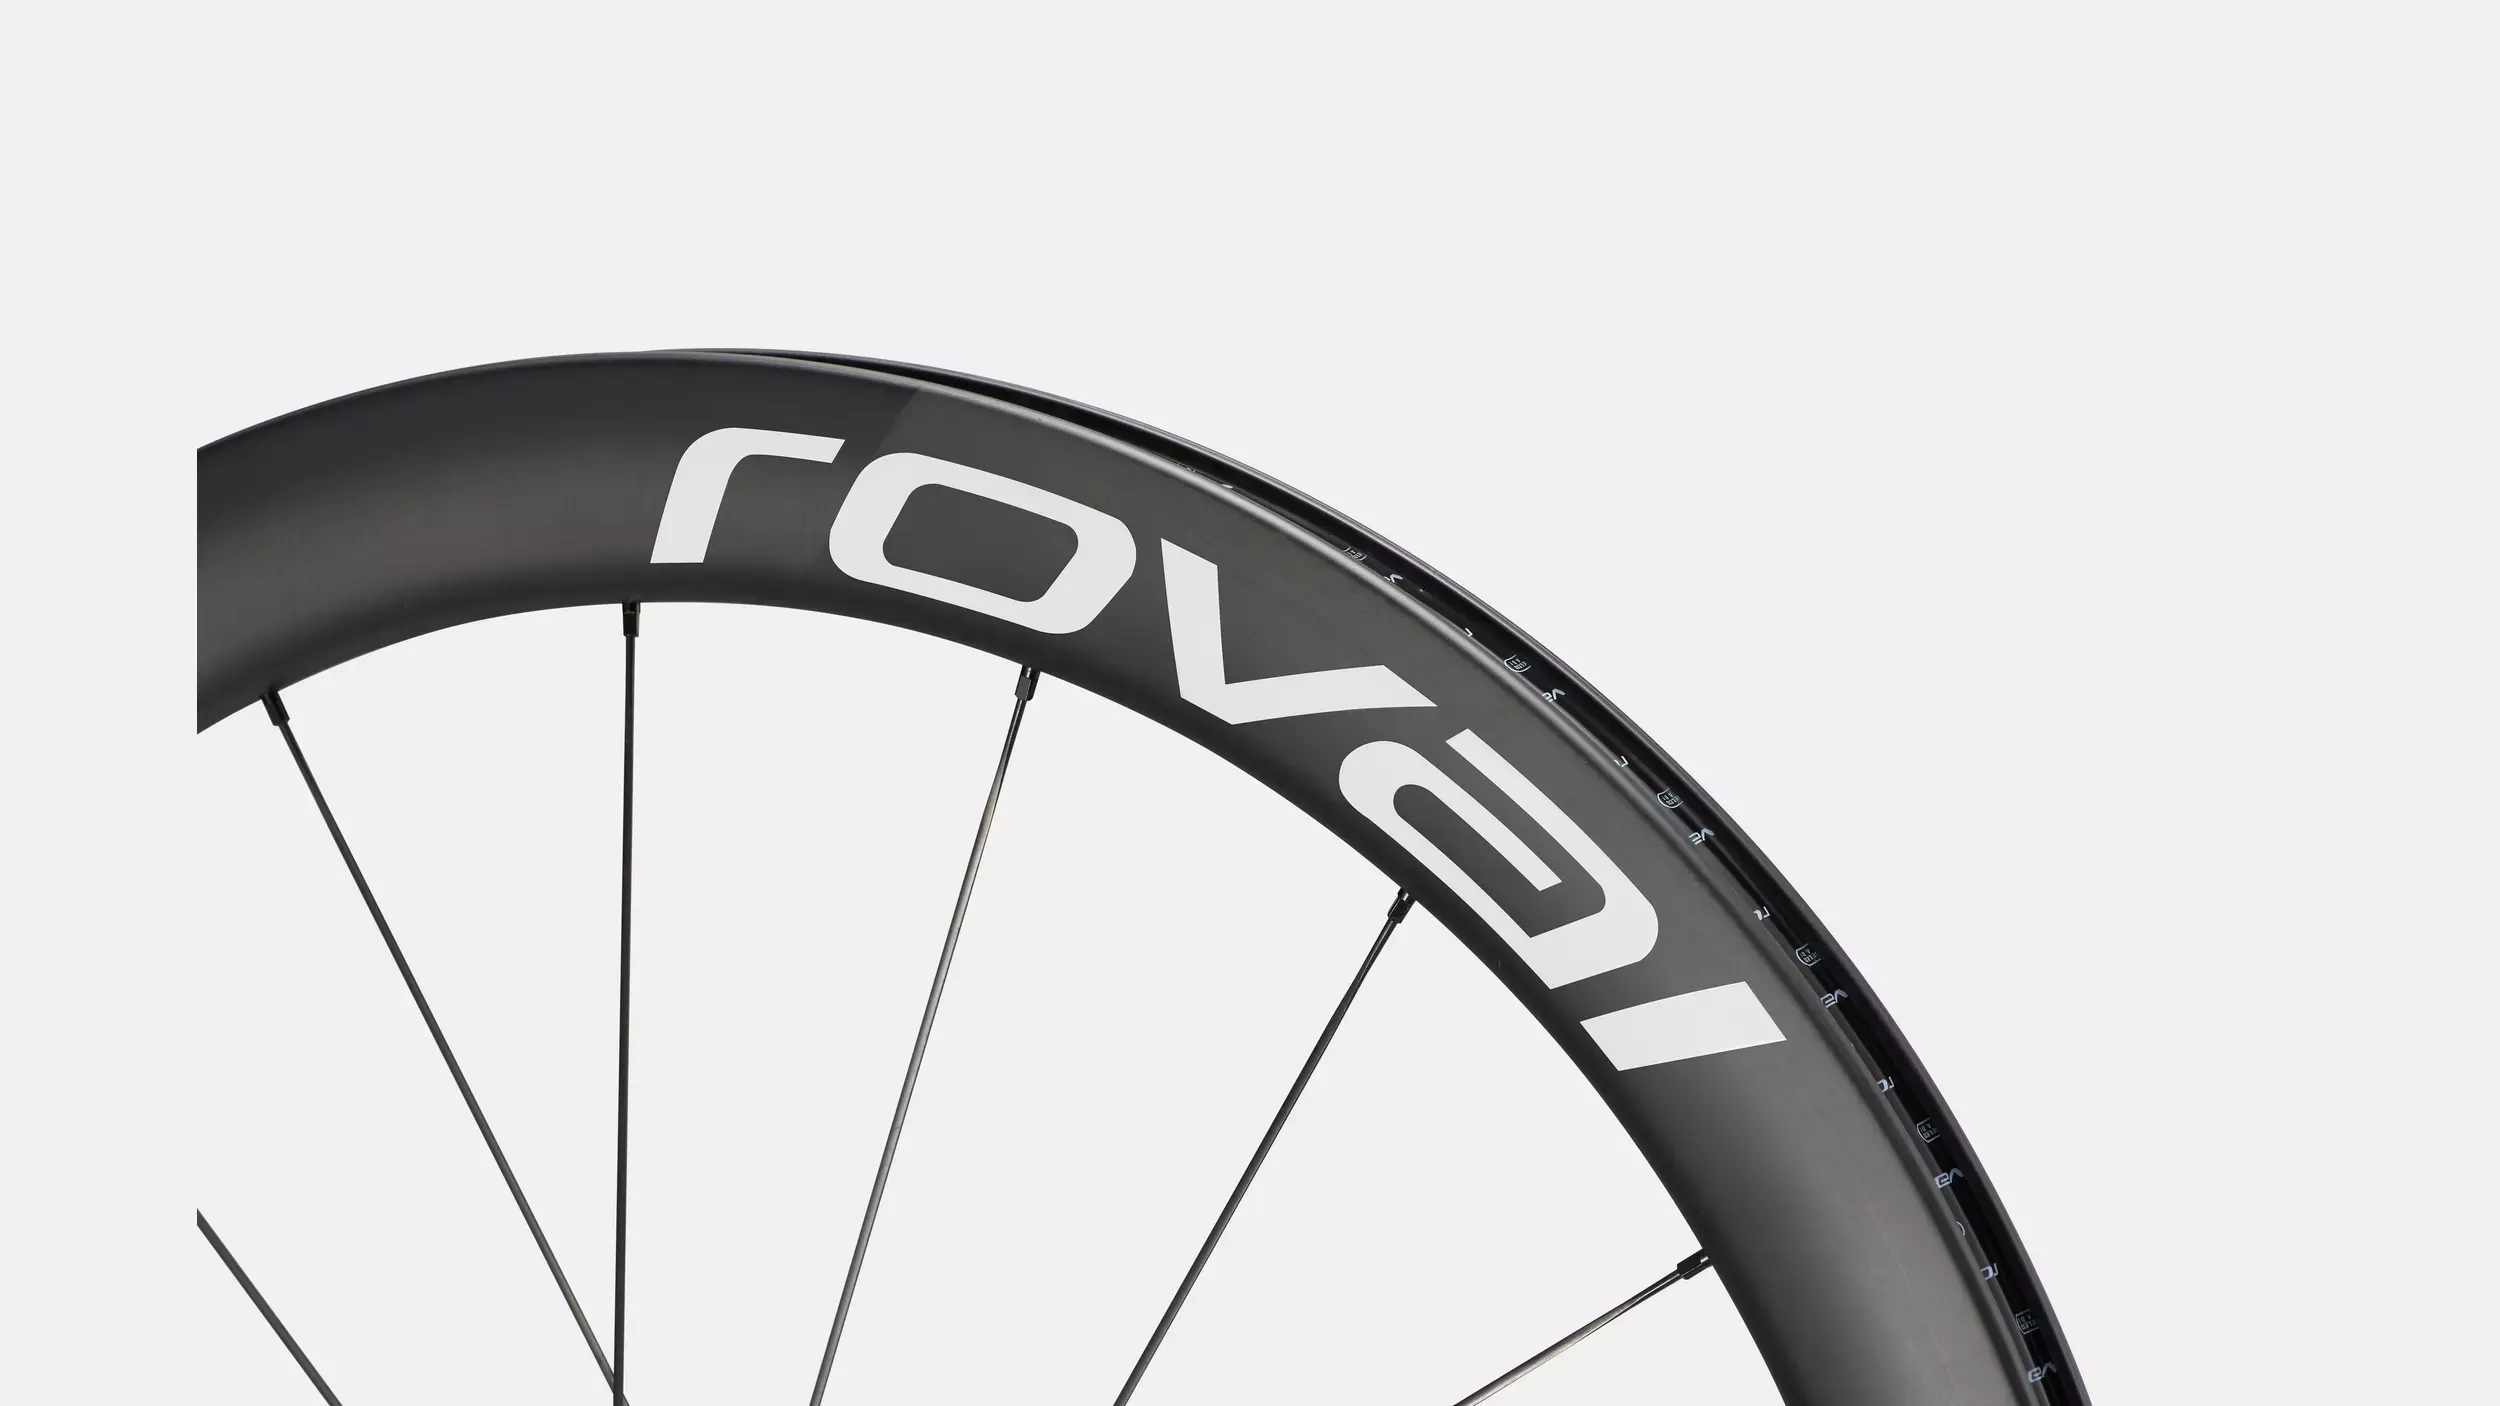 Roval Rapide CLX II Carbon Tubeless Disc Race Voorwiel Carbon/Wit